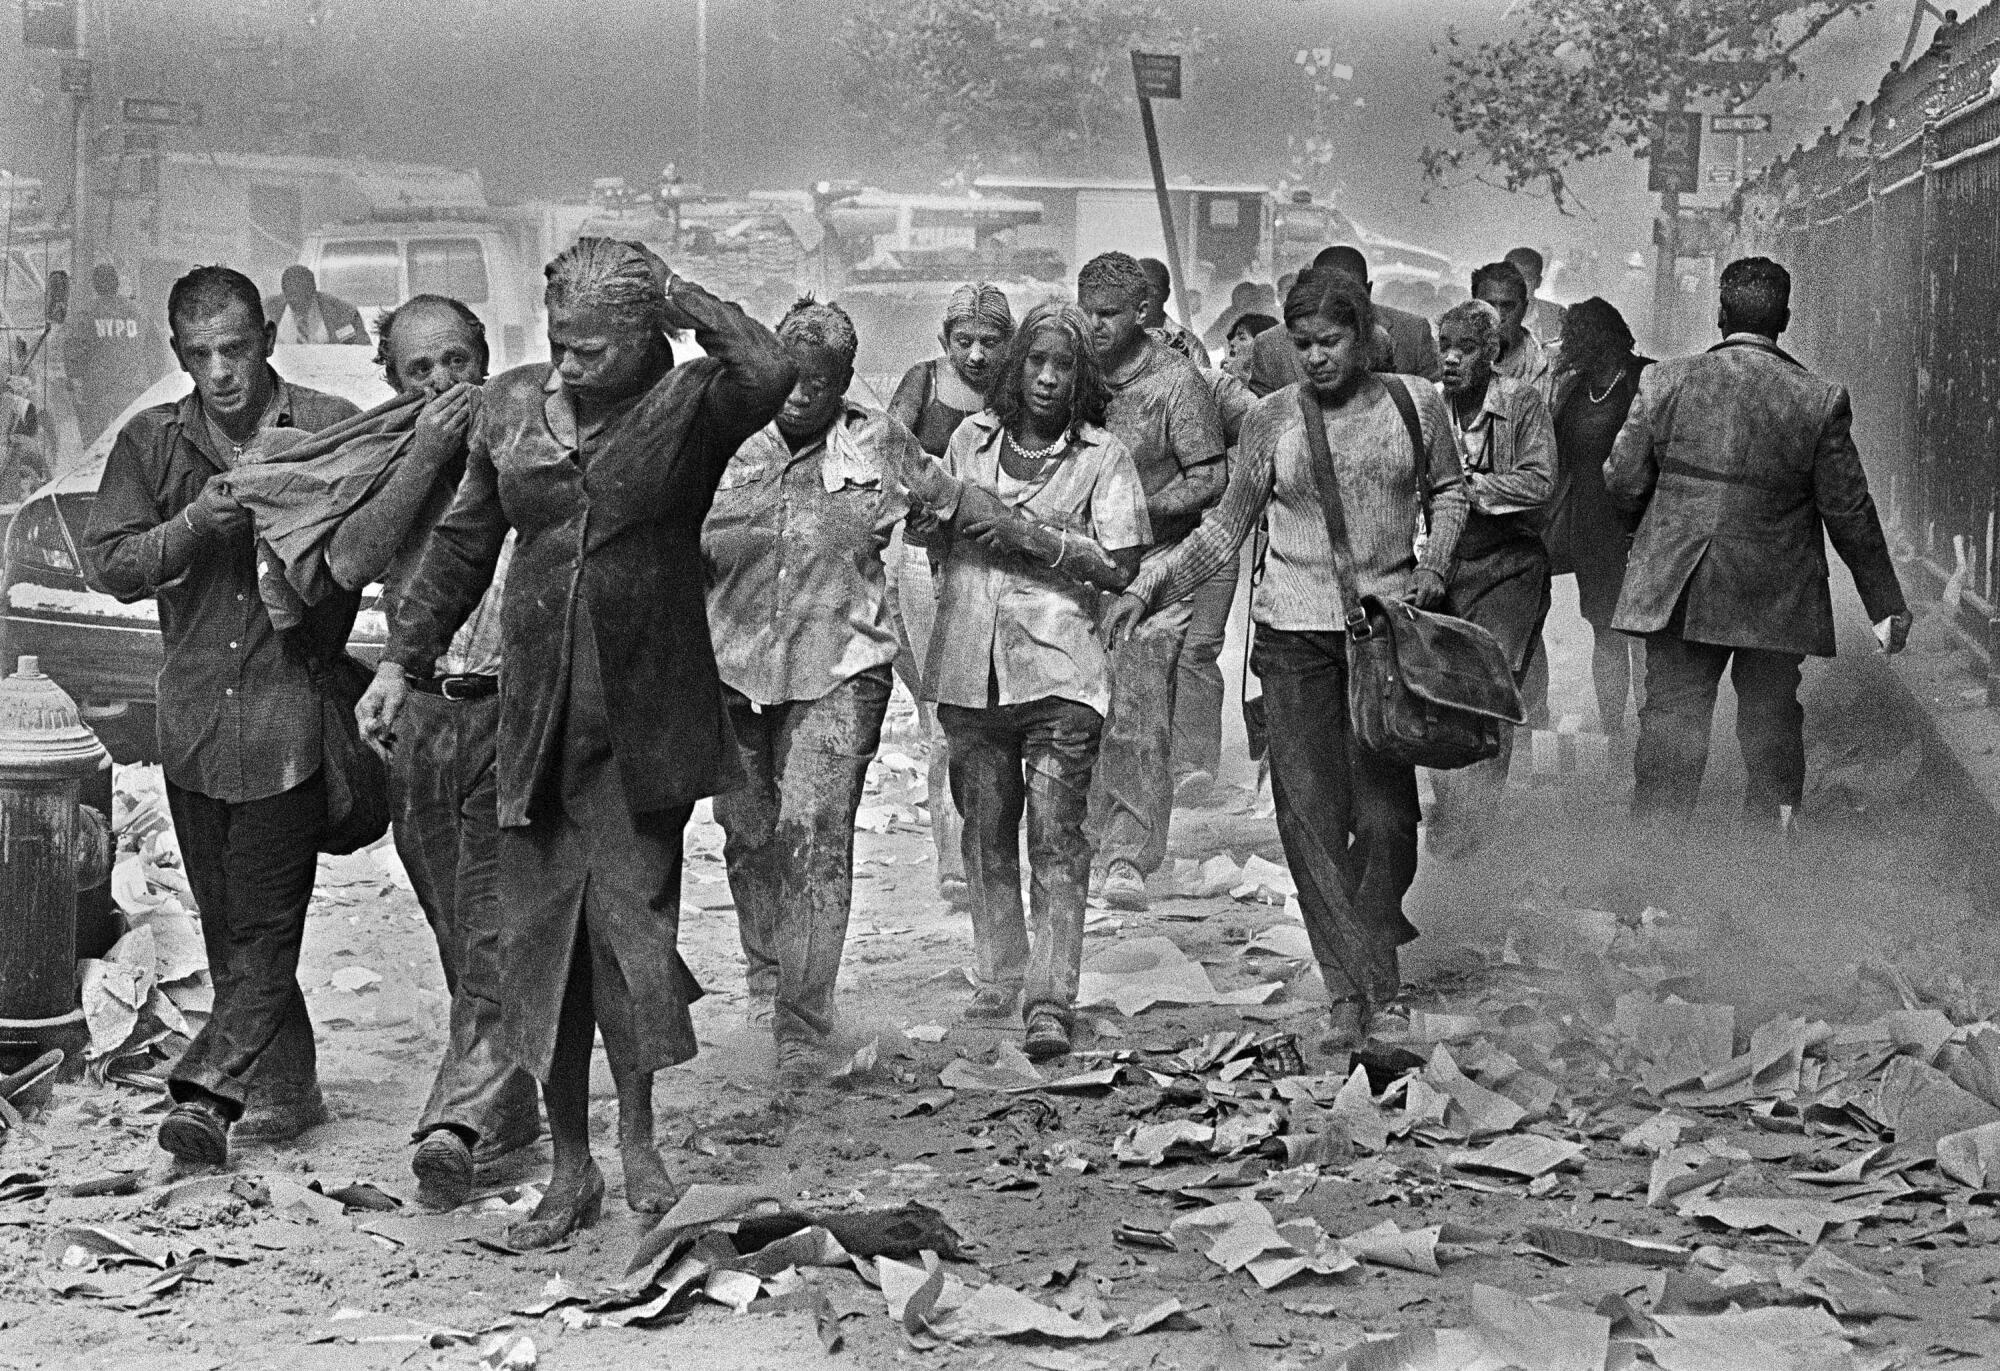 People covered in dust and surrounded by debris walk down a street